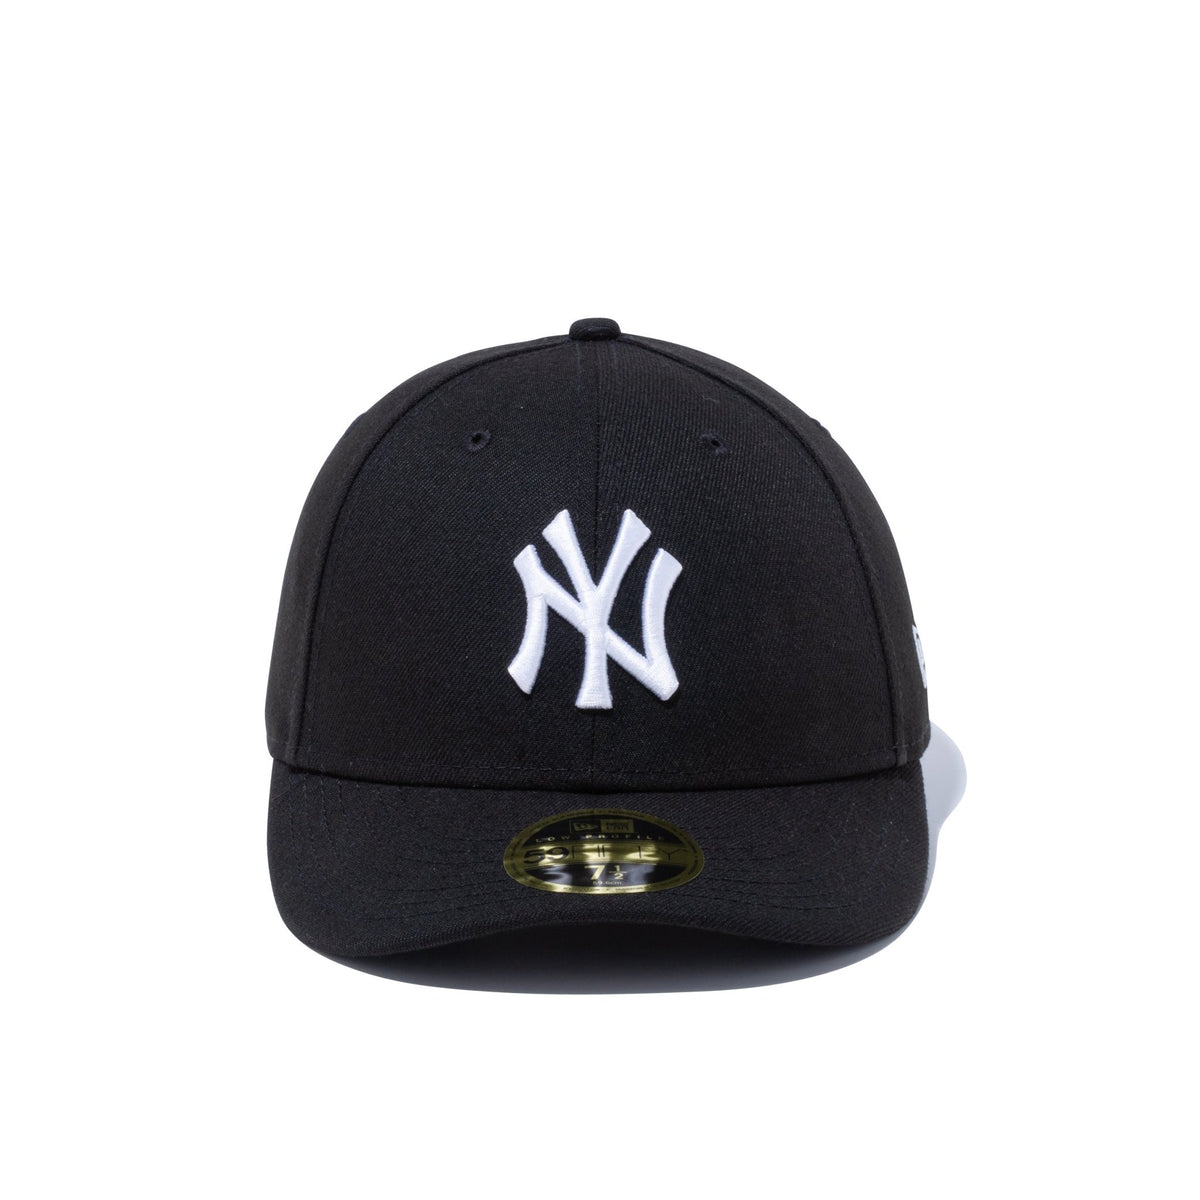 ⑤NEW ERA(R)/Low Profile 59FIFTY(R) ヤンキース-eastgate.mk